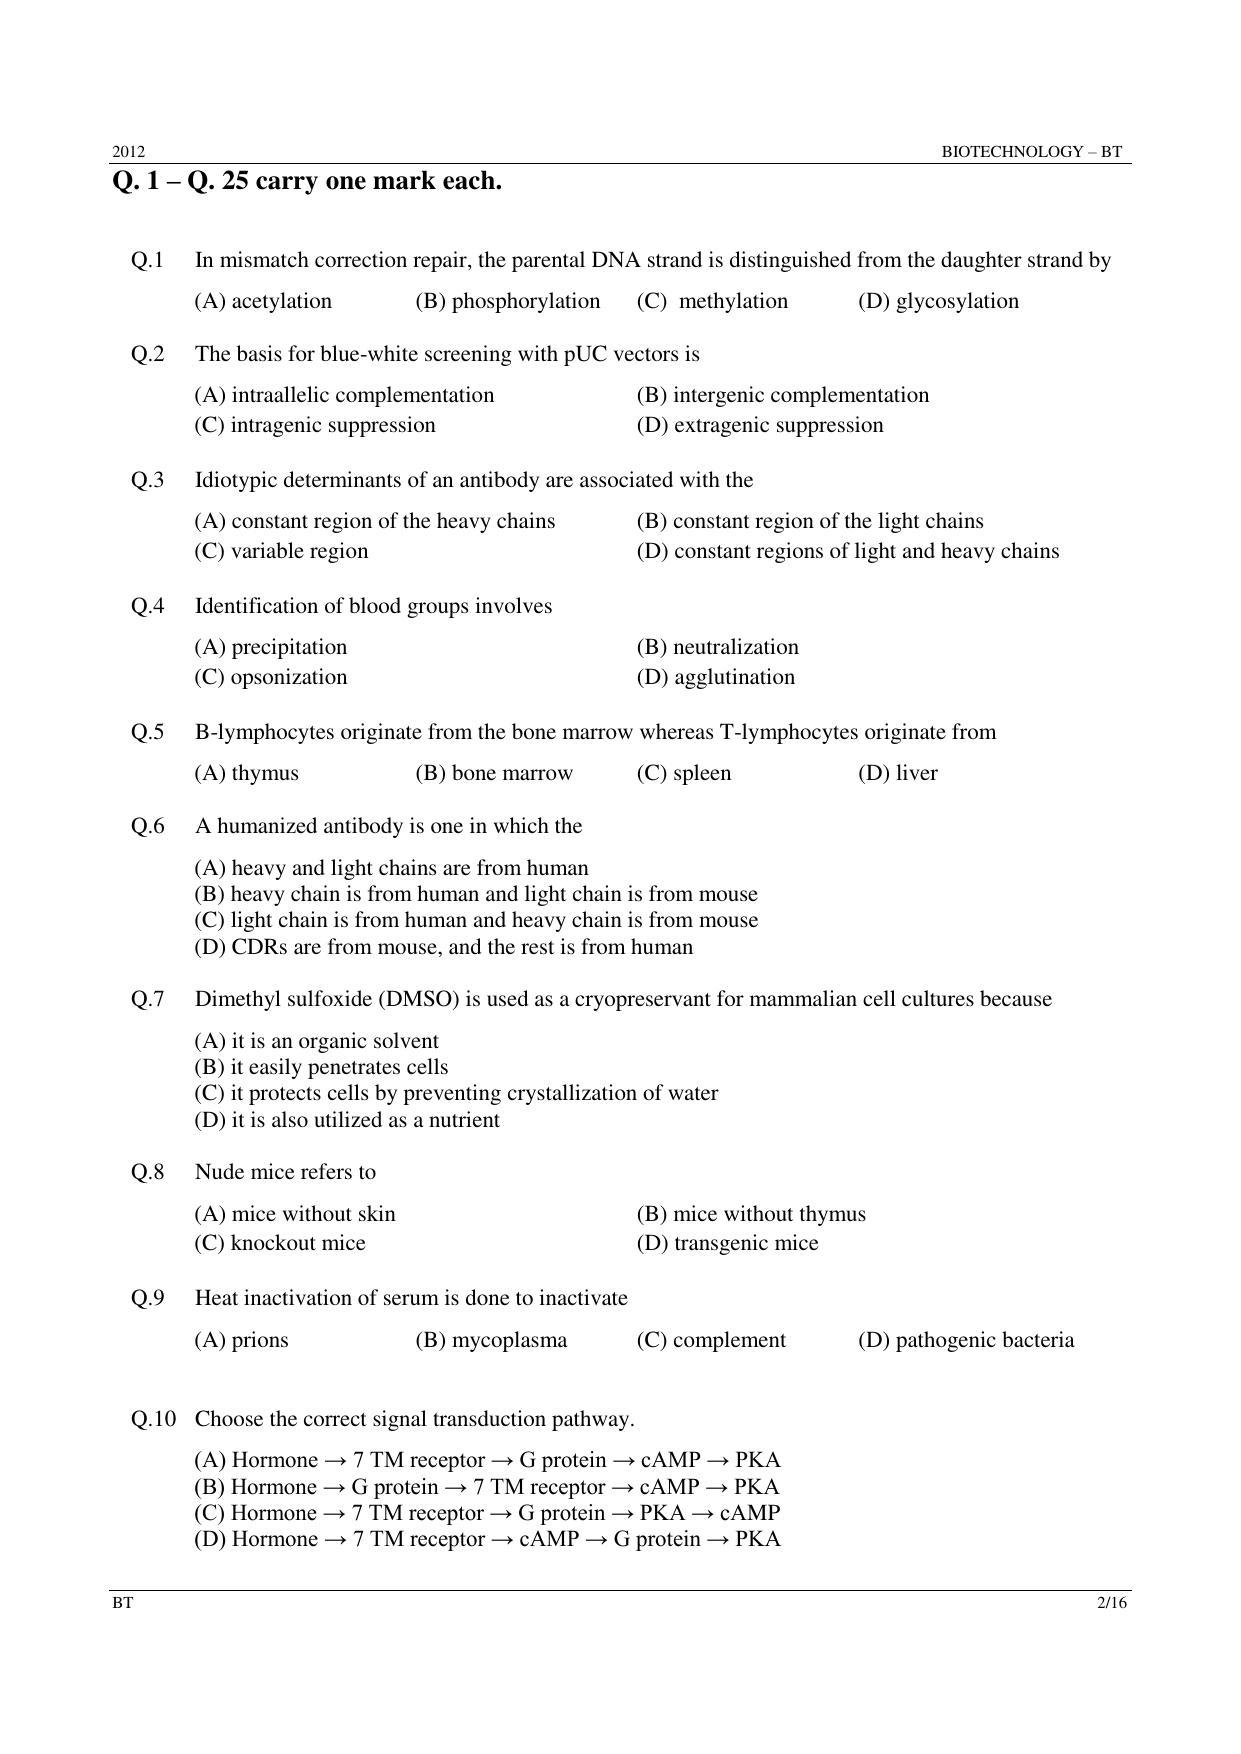 GATE 2012 Biotechnology (BT) Question Paper with Answer Key - Page 2